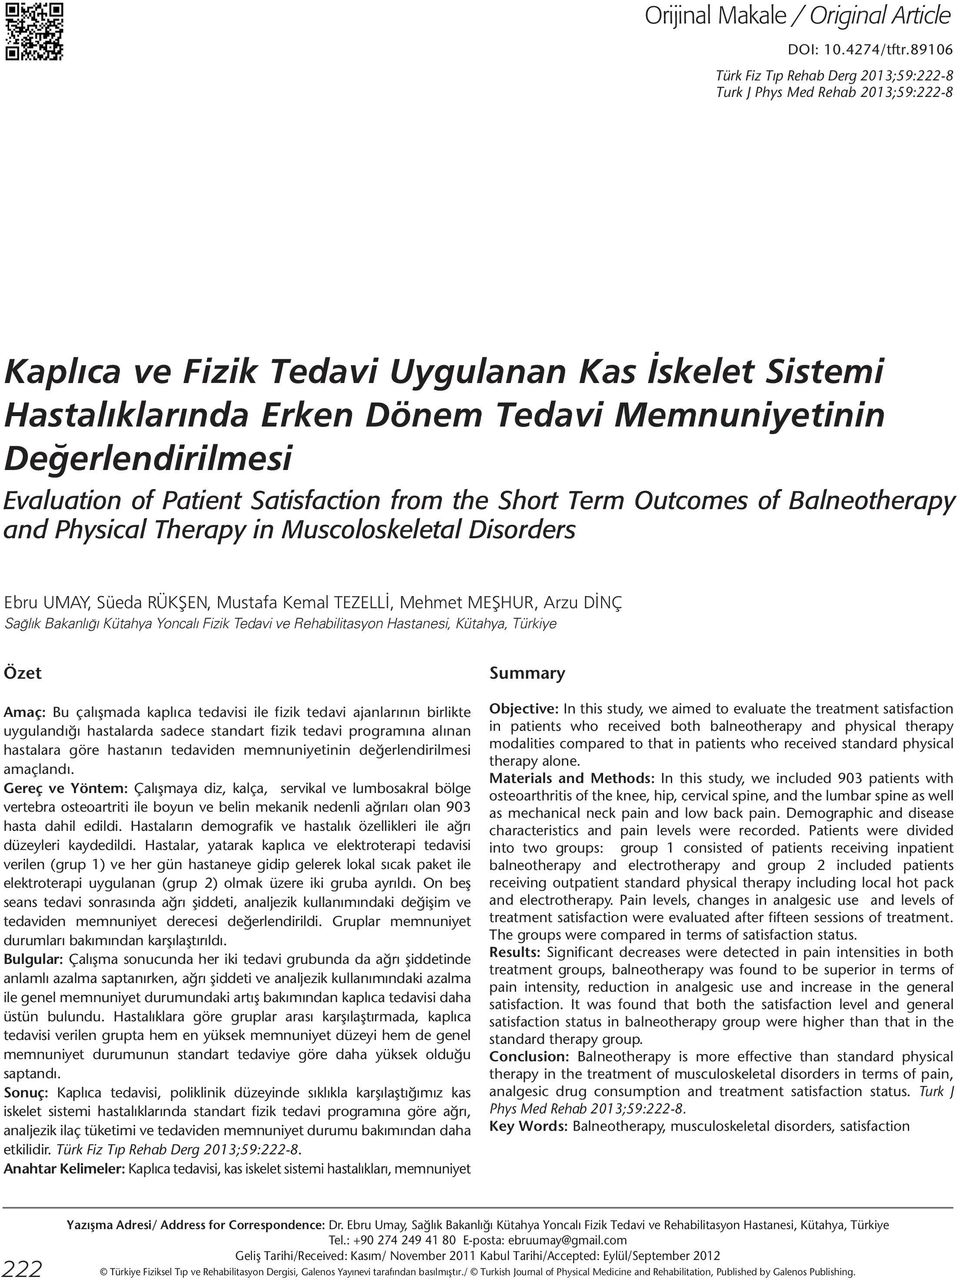 Değerlendirilmesi Evaluation of Patient Satisfaction from the Short Term Outcomes of Balneotherapy and Physical Therapy in Muscoloskeletal Disorders Ebru UMAY, Süeda RÜKŞEN, Mustafa Kemal TEZELLİ,